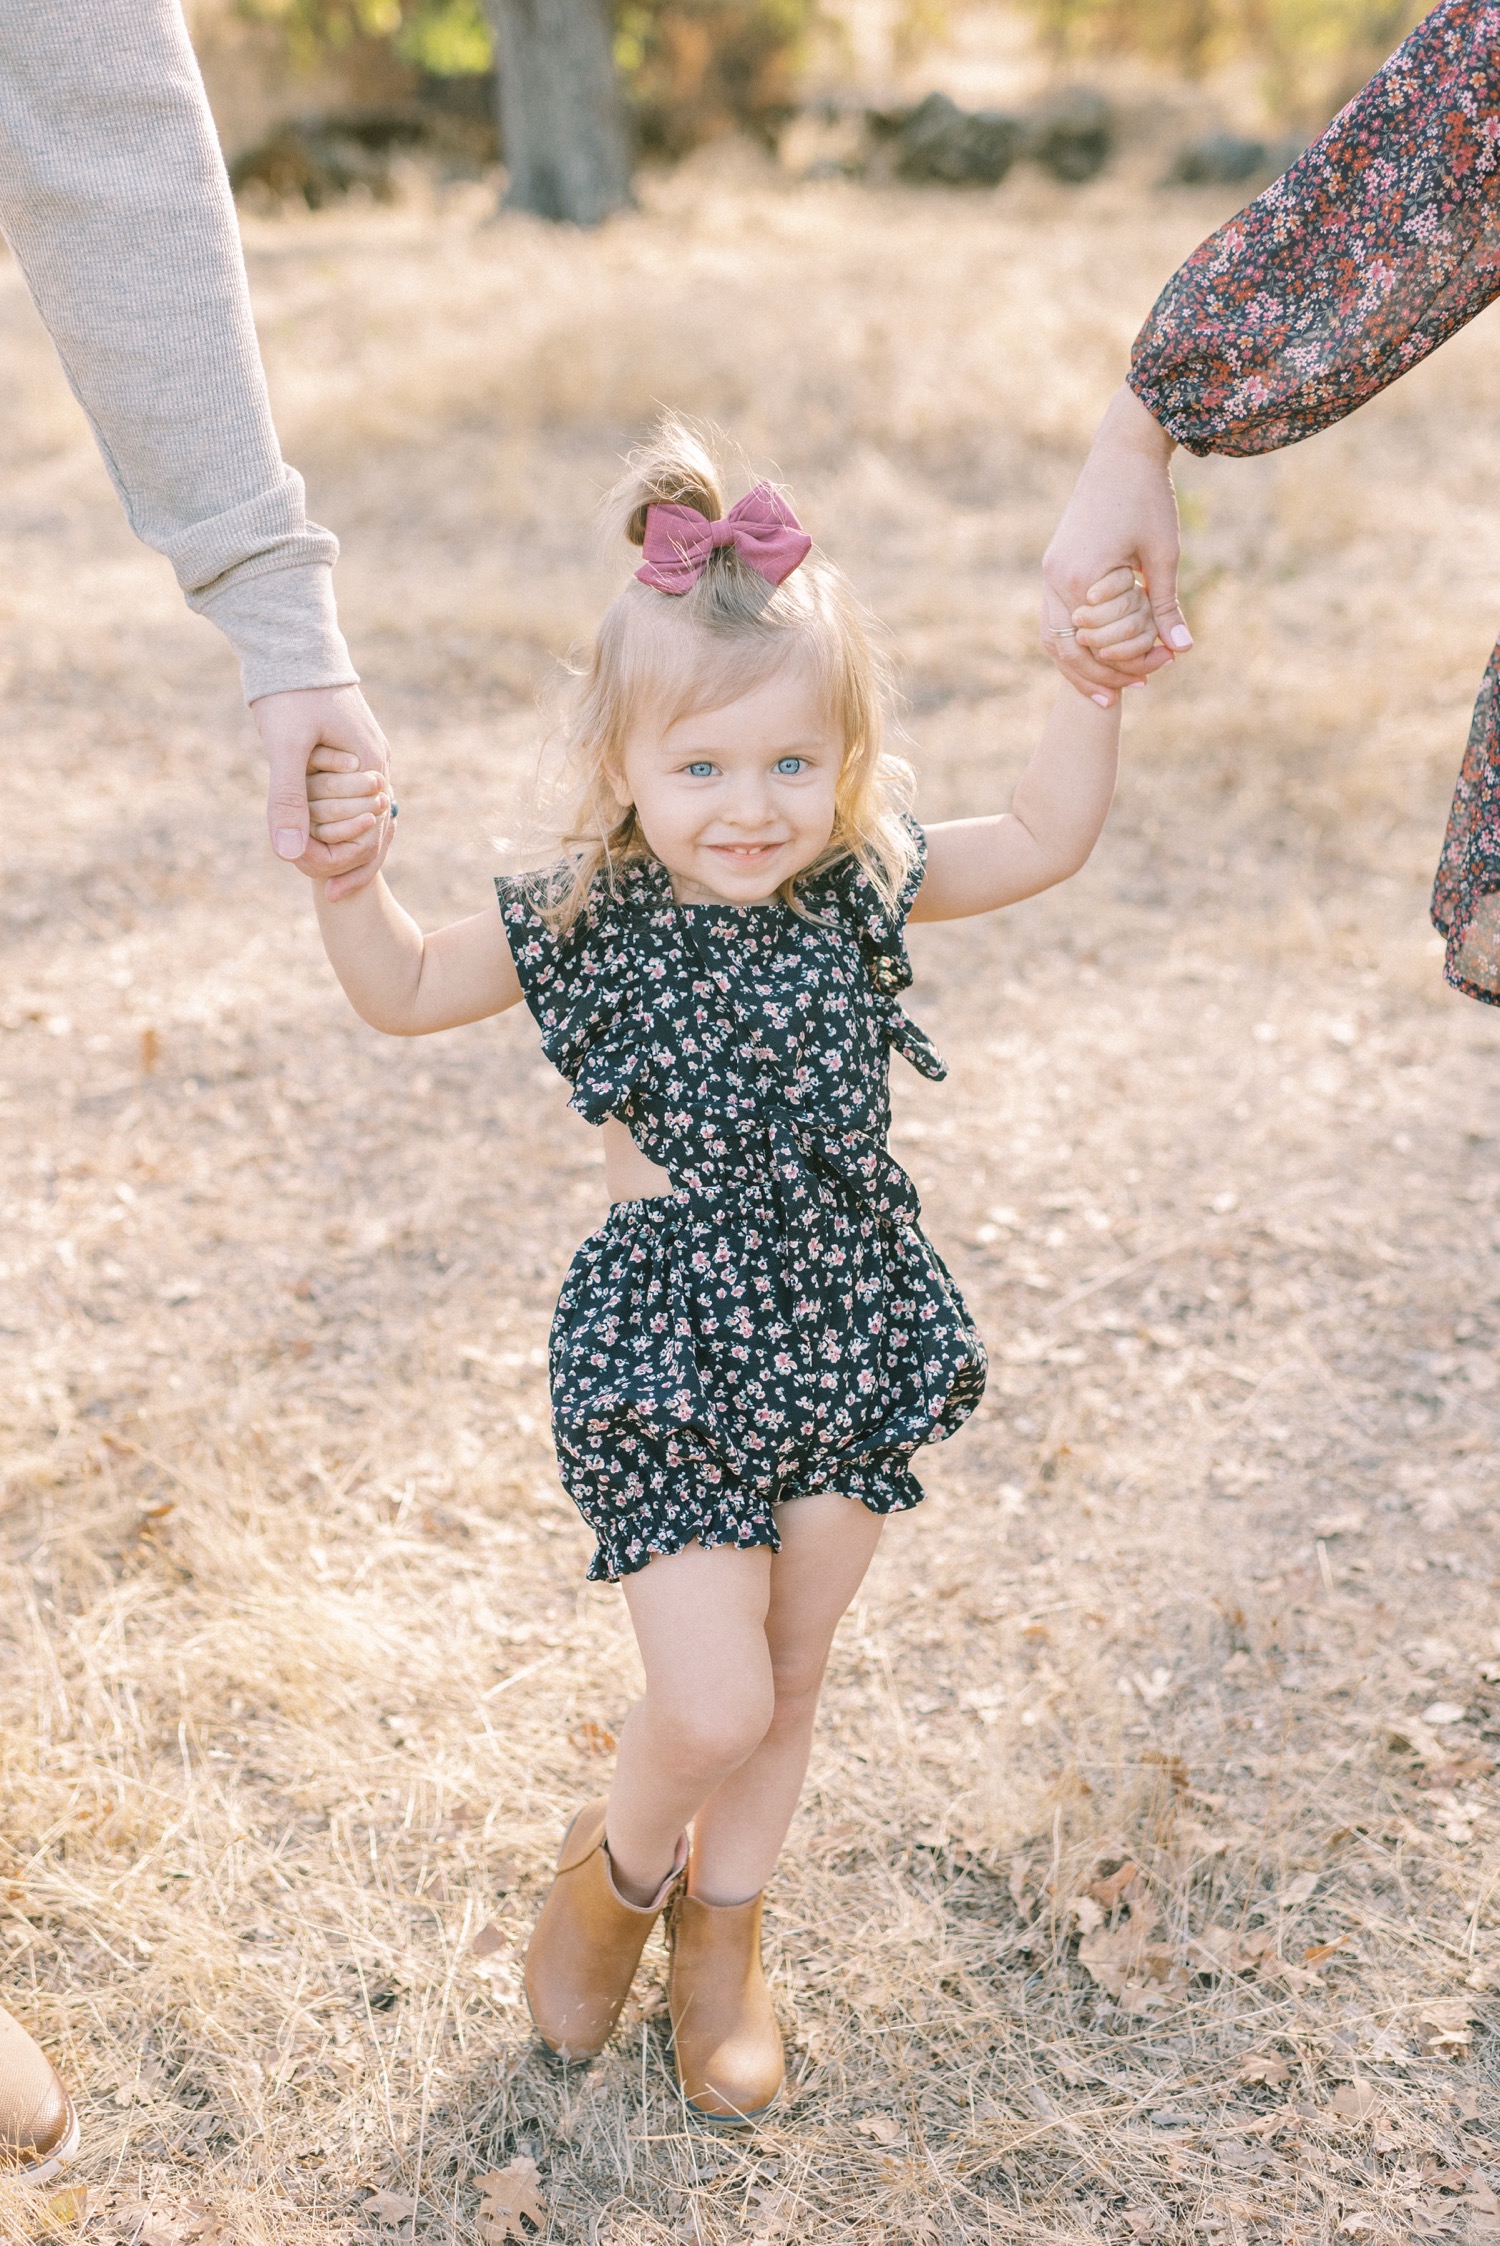 Well Hello cute family! – Simplicity Photography